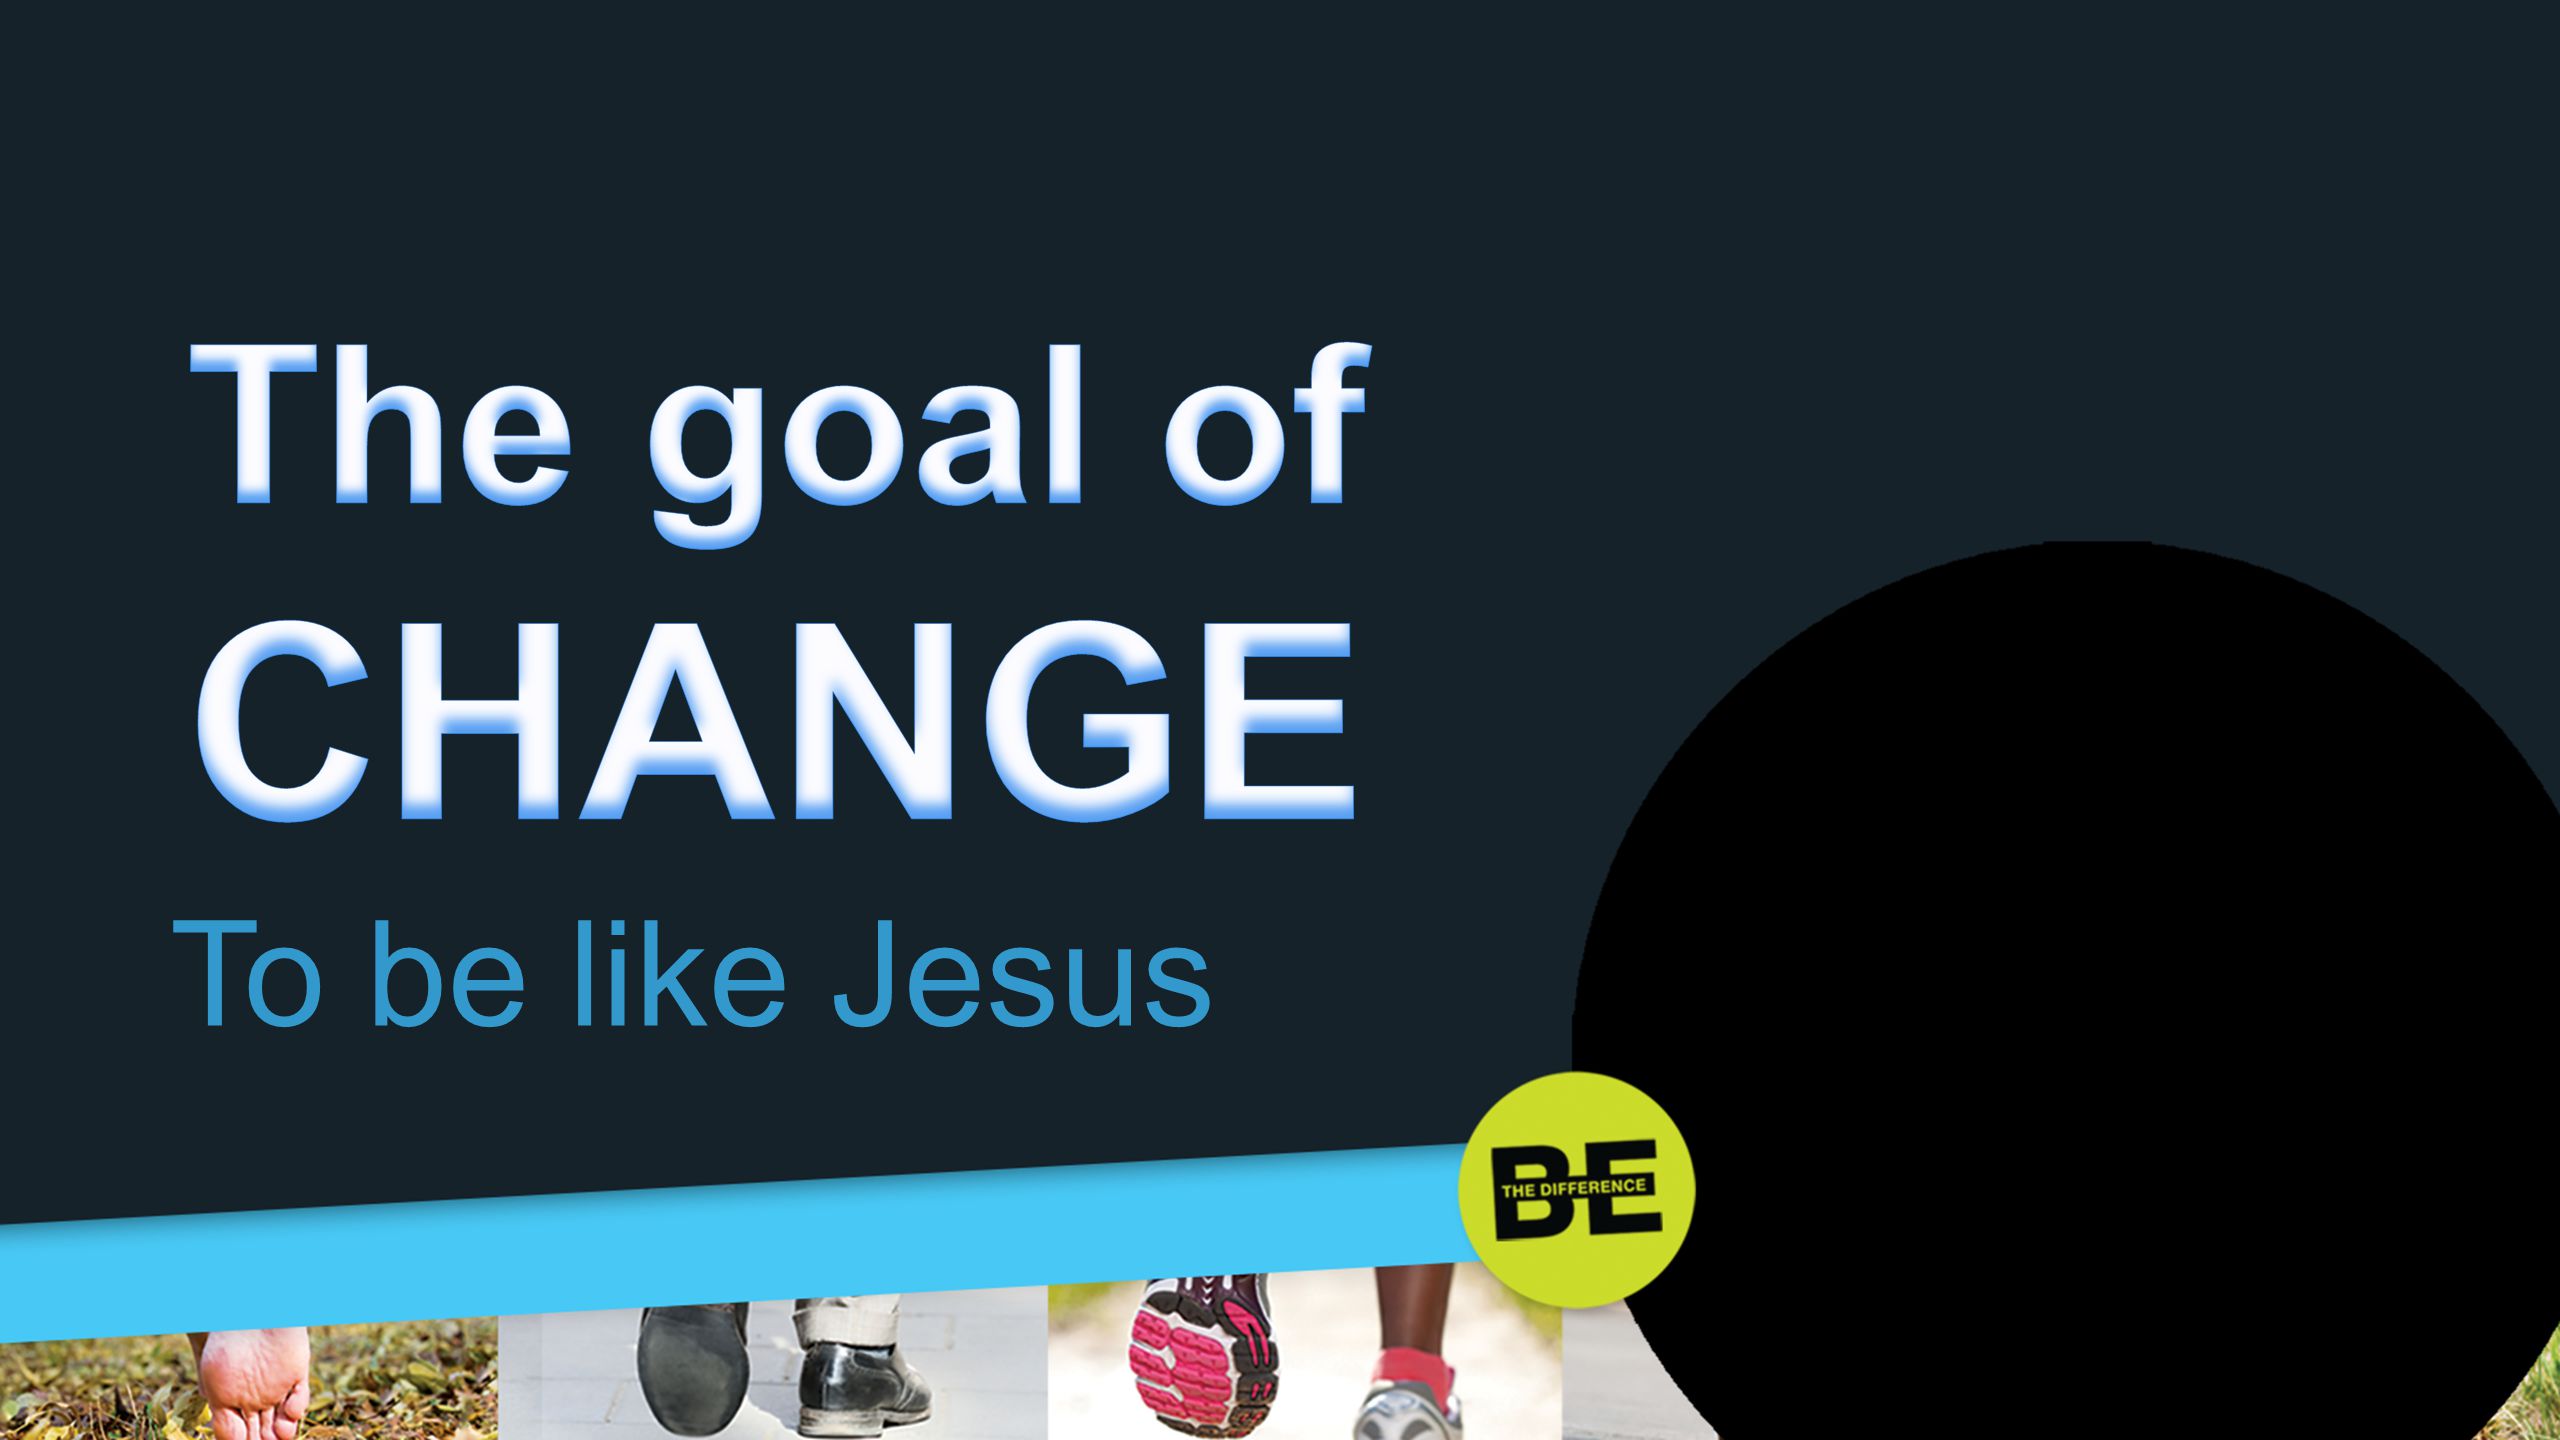 The goal of CHANGE To be like Jesus 3. The goal of change